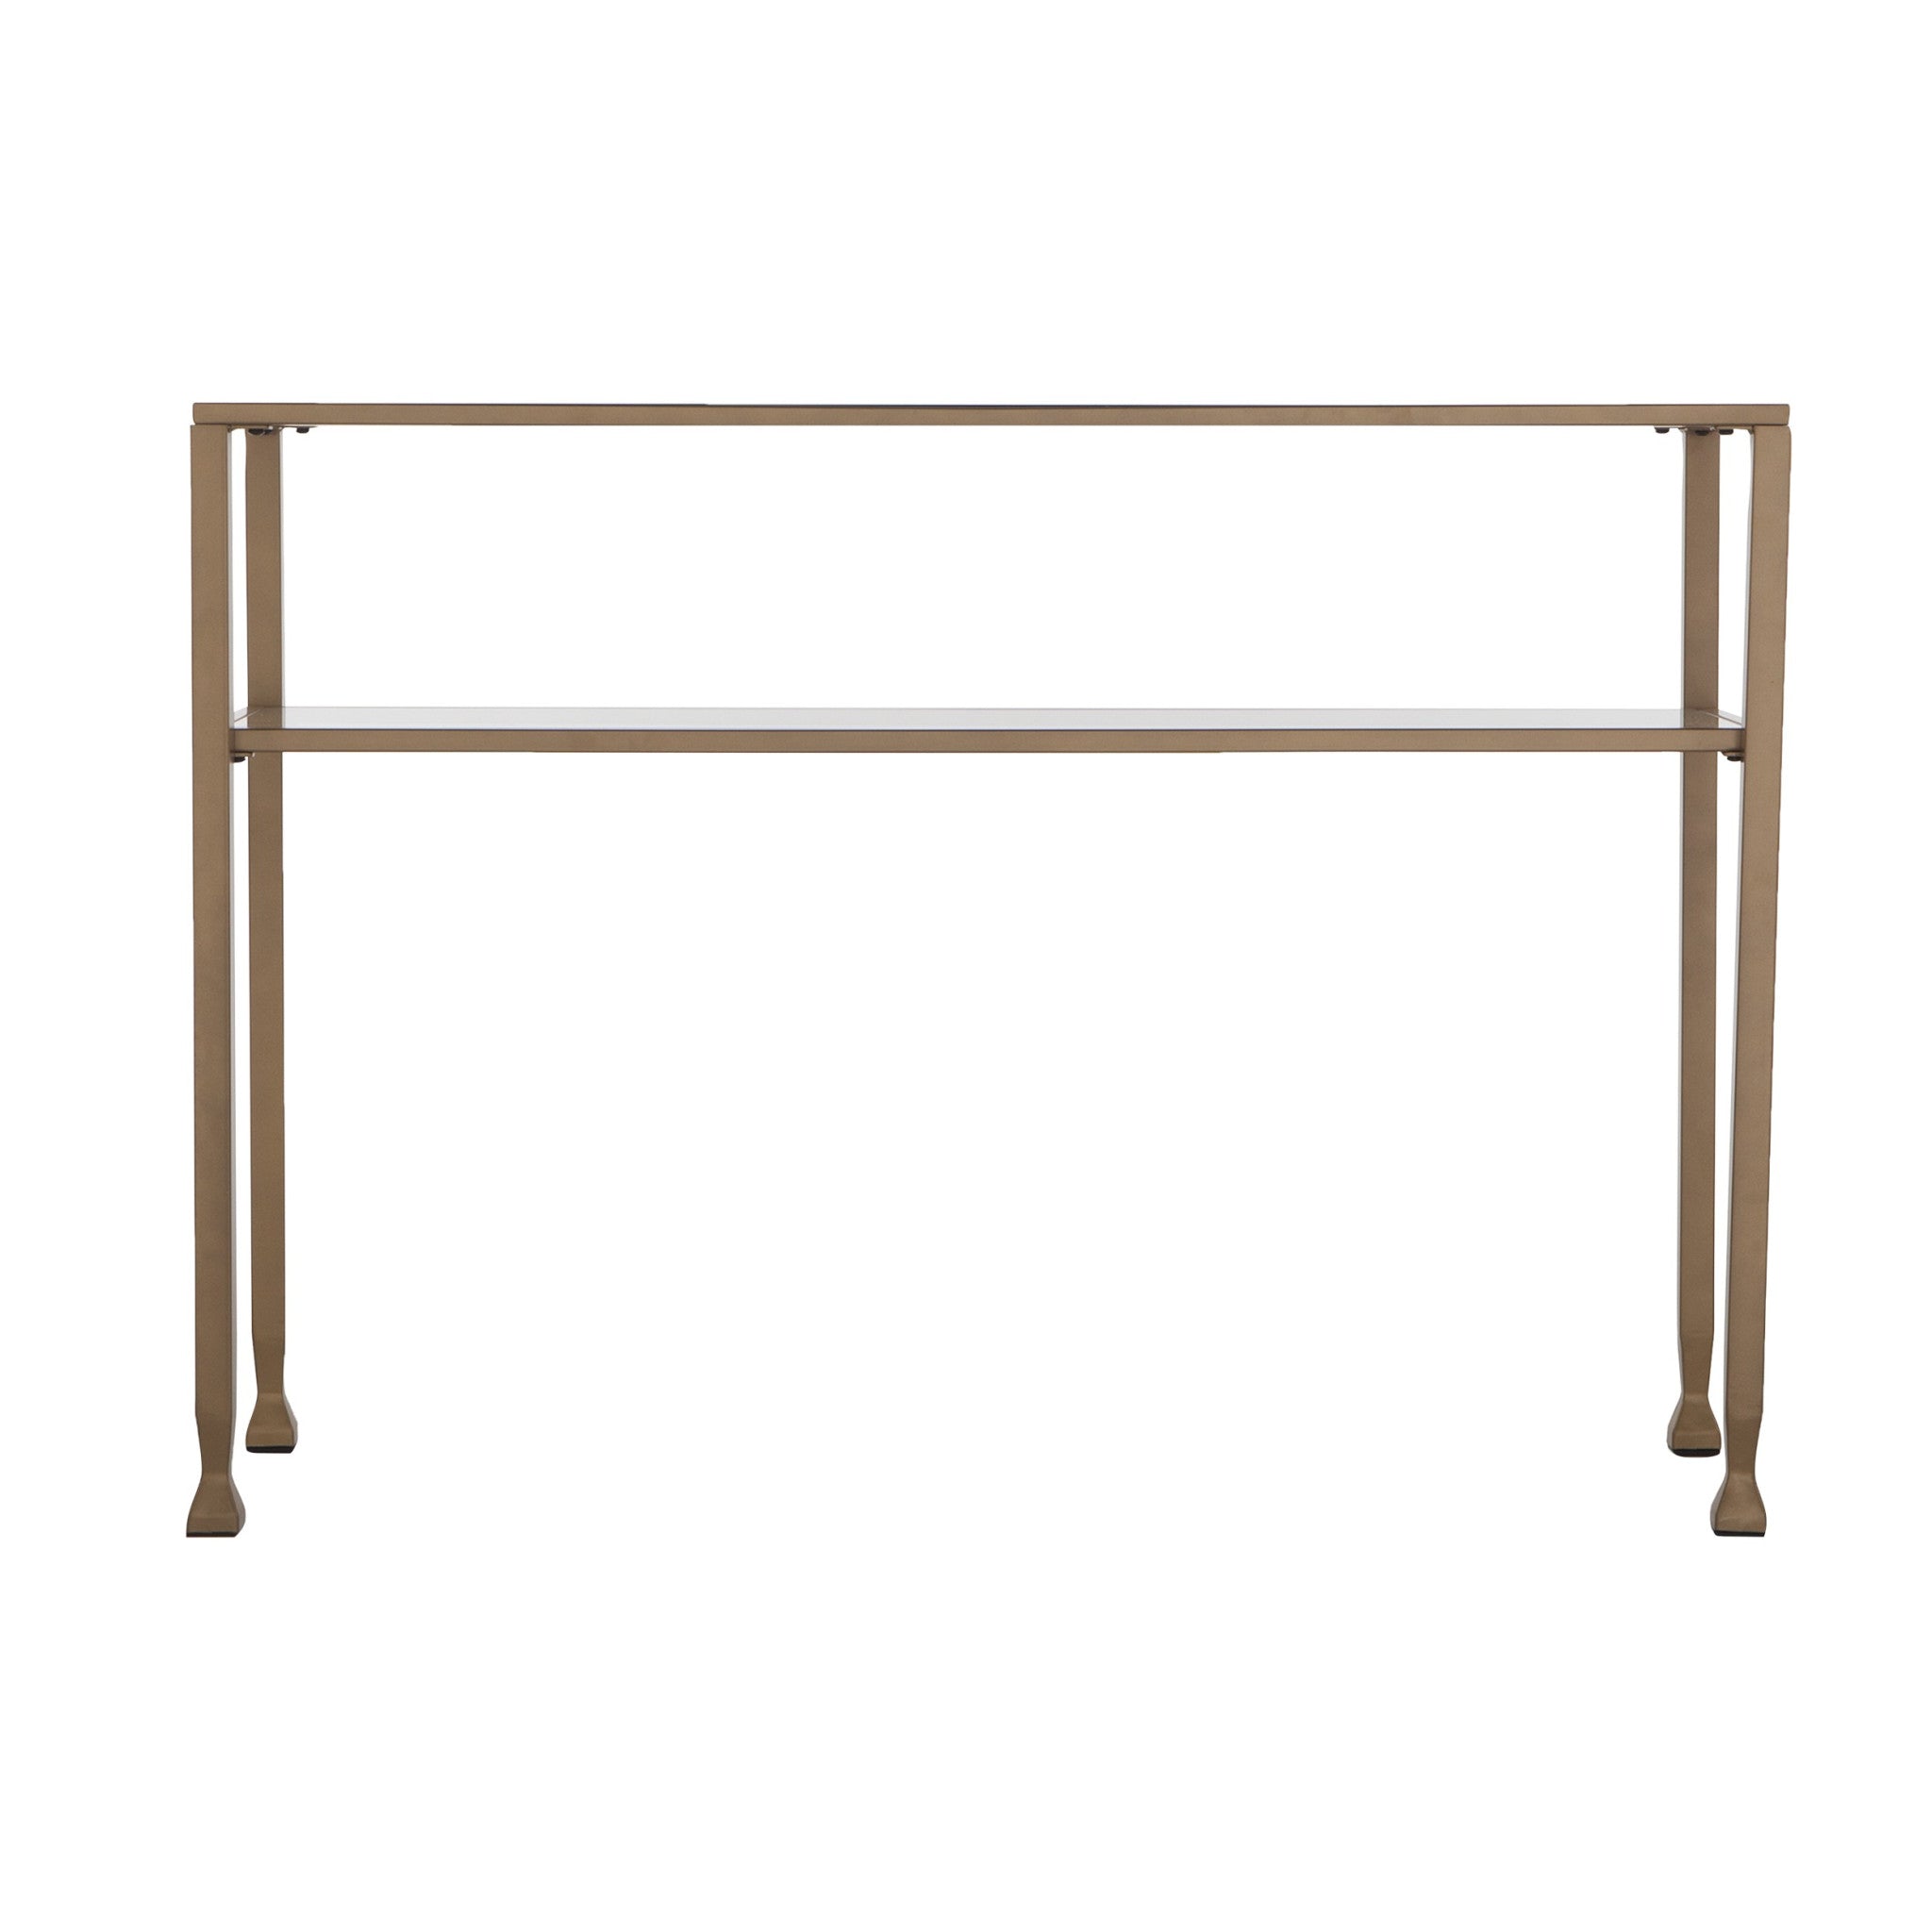 43" Clear and Gold Glass Console Table With Storage